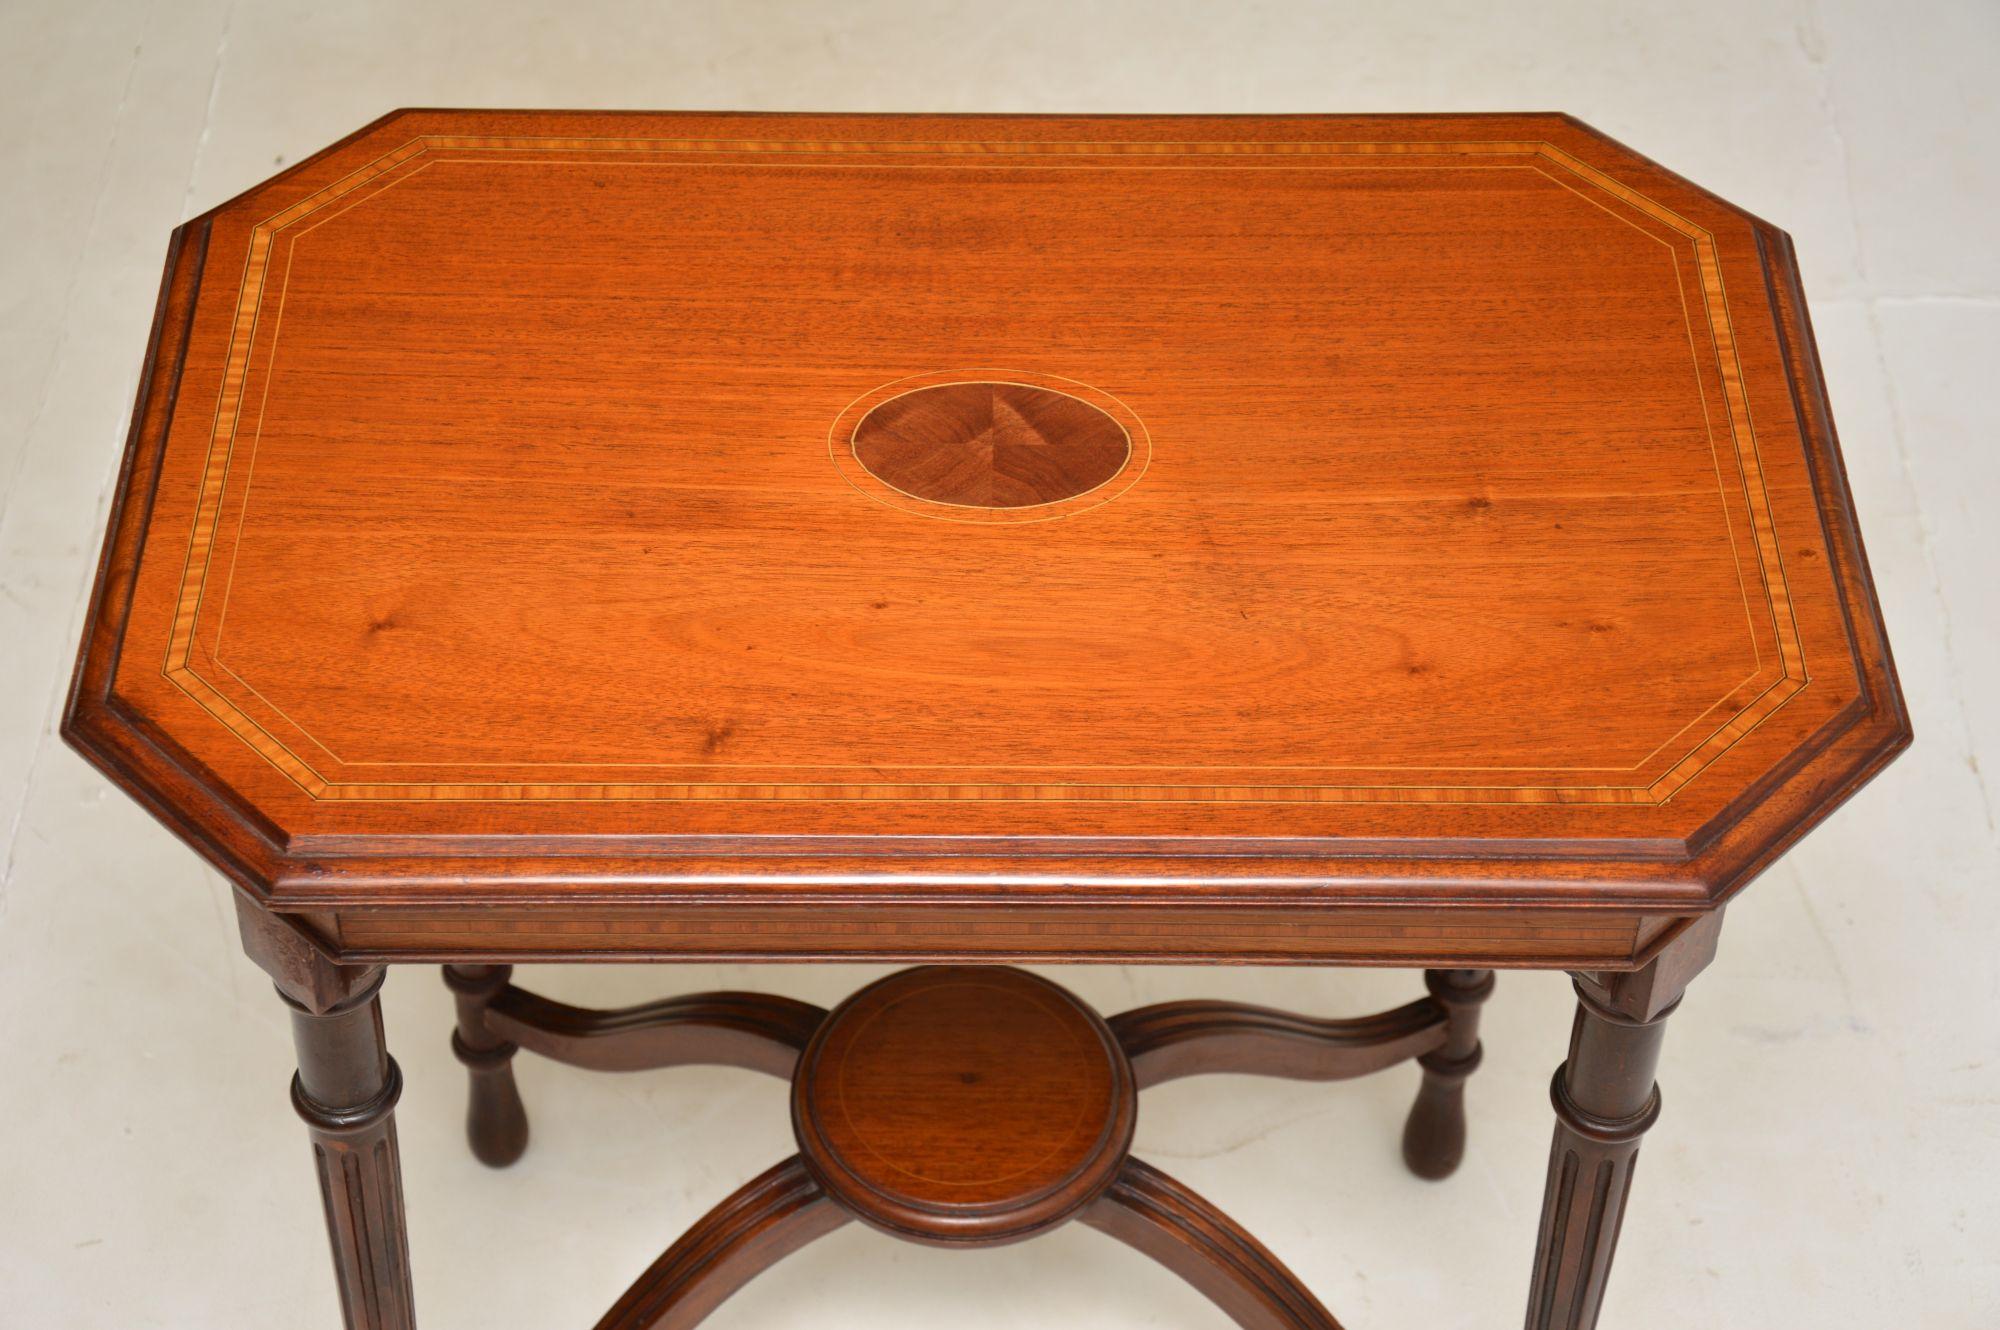 British Antique Victorian Inlaid Occasional Side Table